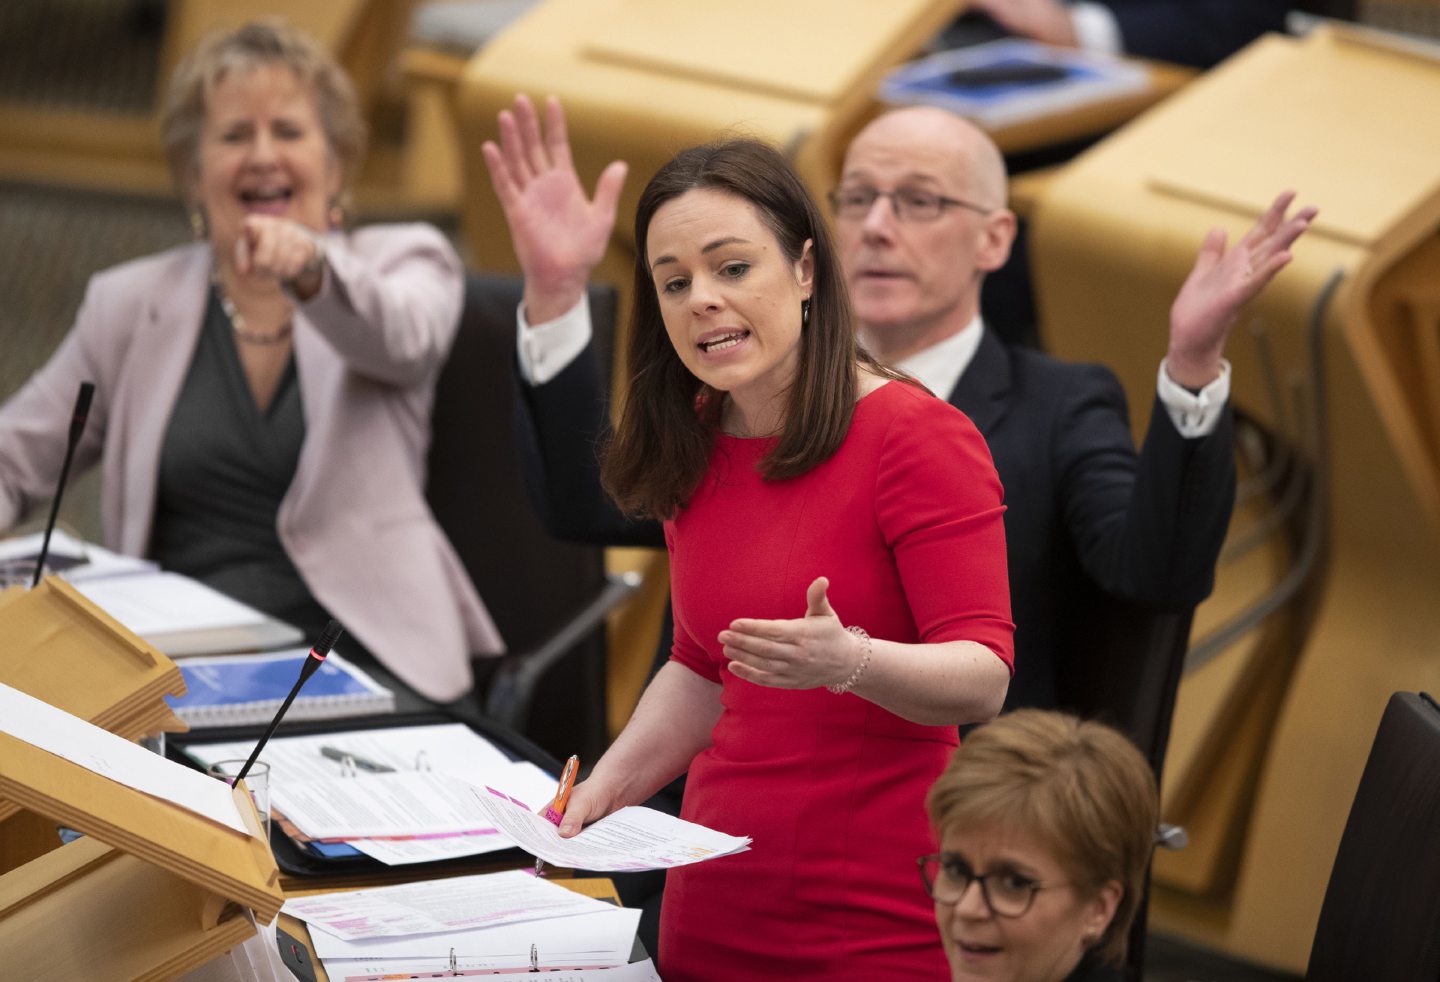 Public finance minister Kate Forbes unveils the Scottish Government's spending pledges for the next financial year in the debating chamber at the Scottish Parliament